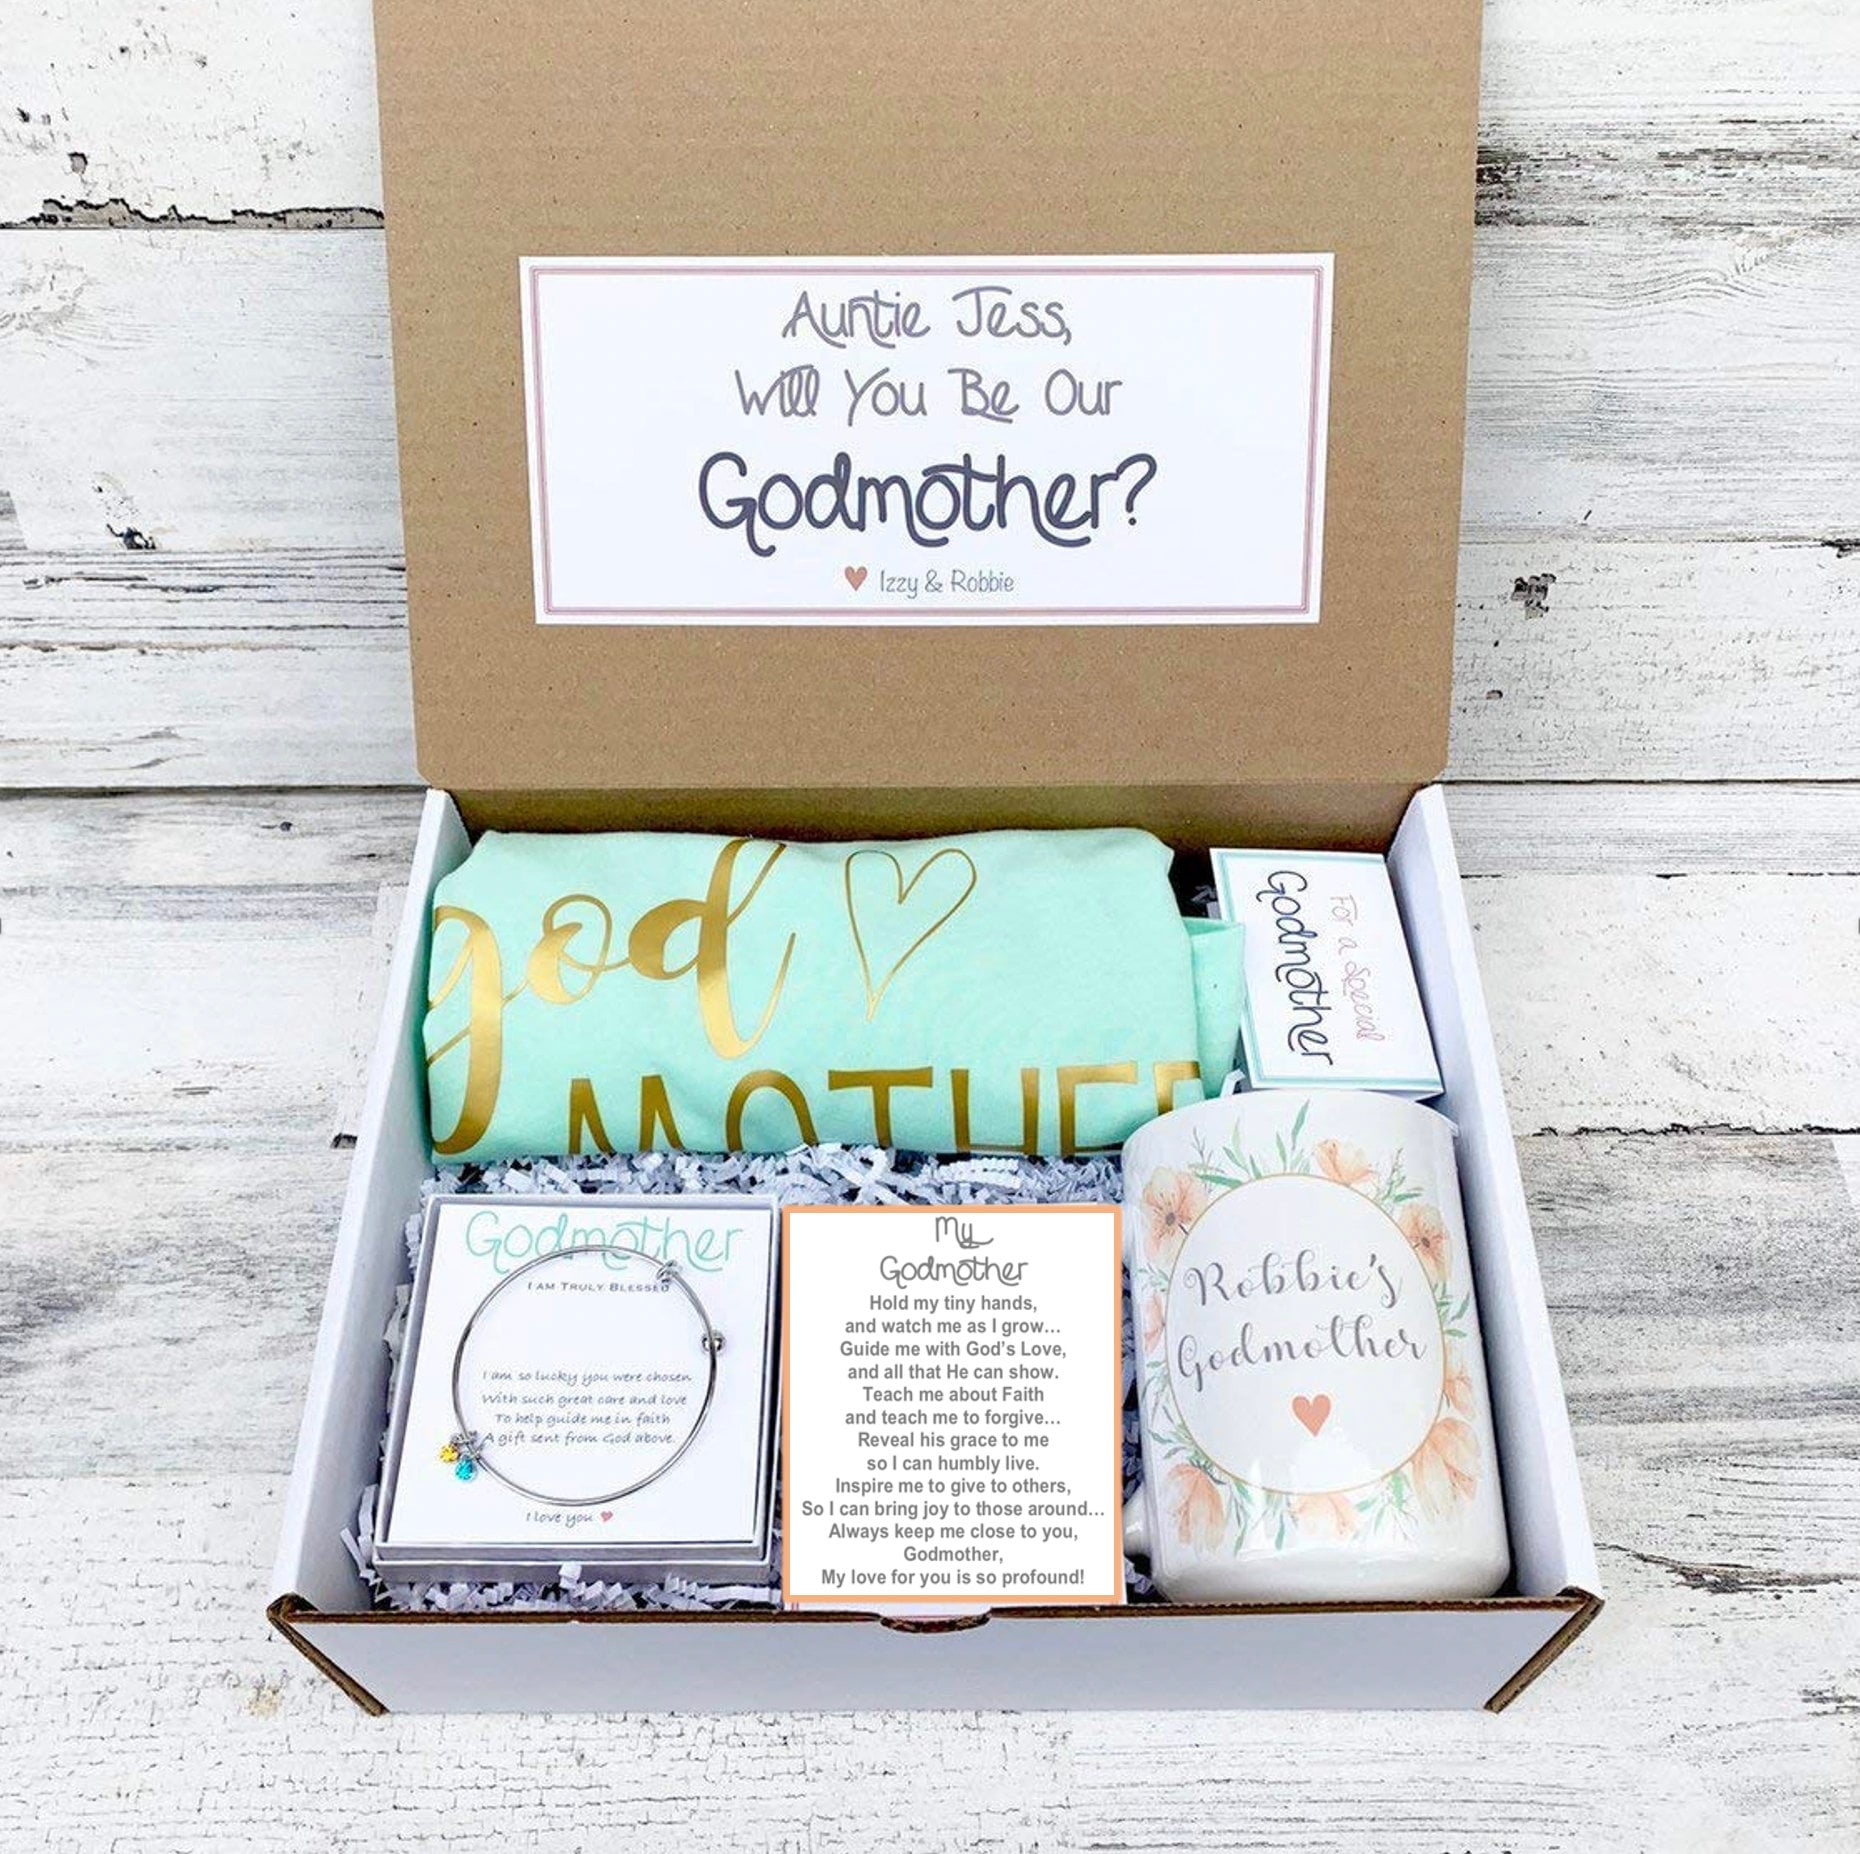 godmother-box-personalized-godmother-gift-will-you-be-my-godmother-box